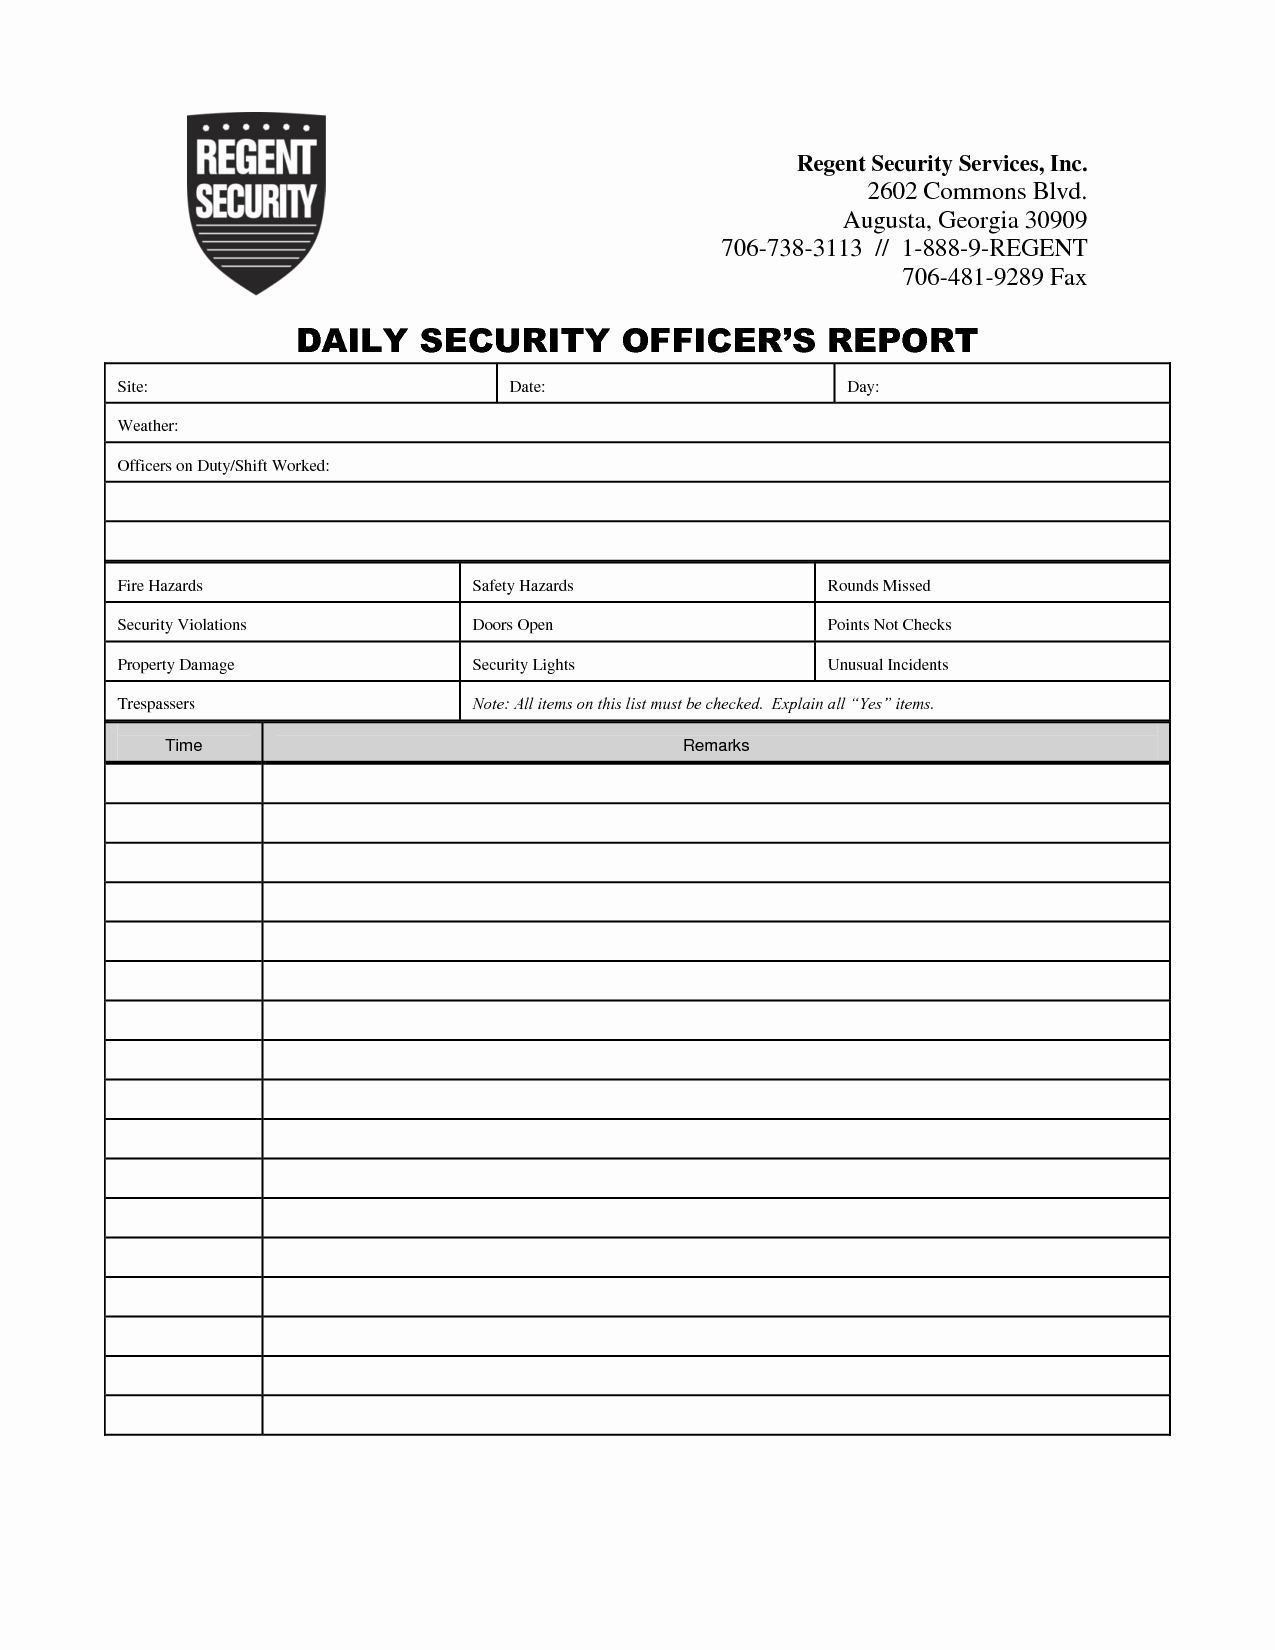 Security Incident Report Sample Elegant Security Guard Daily Activity Report Template